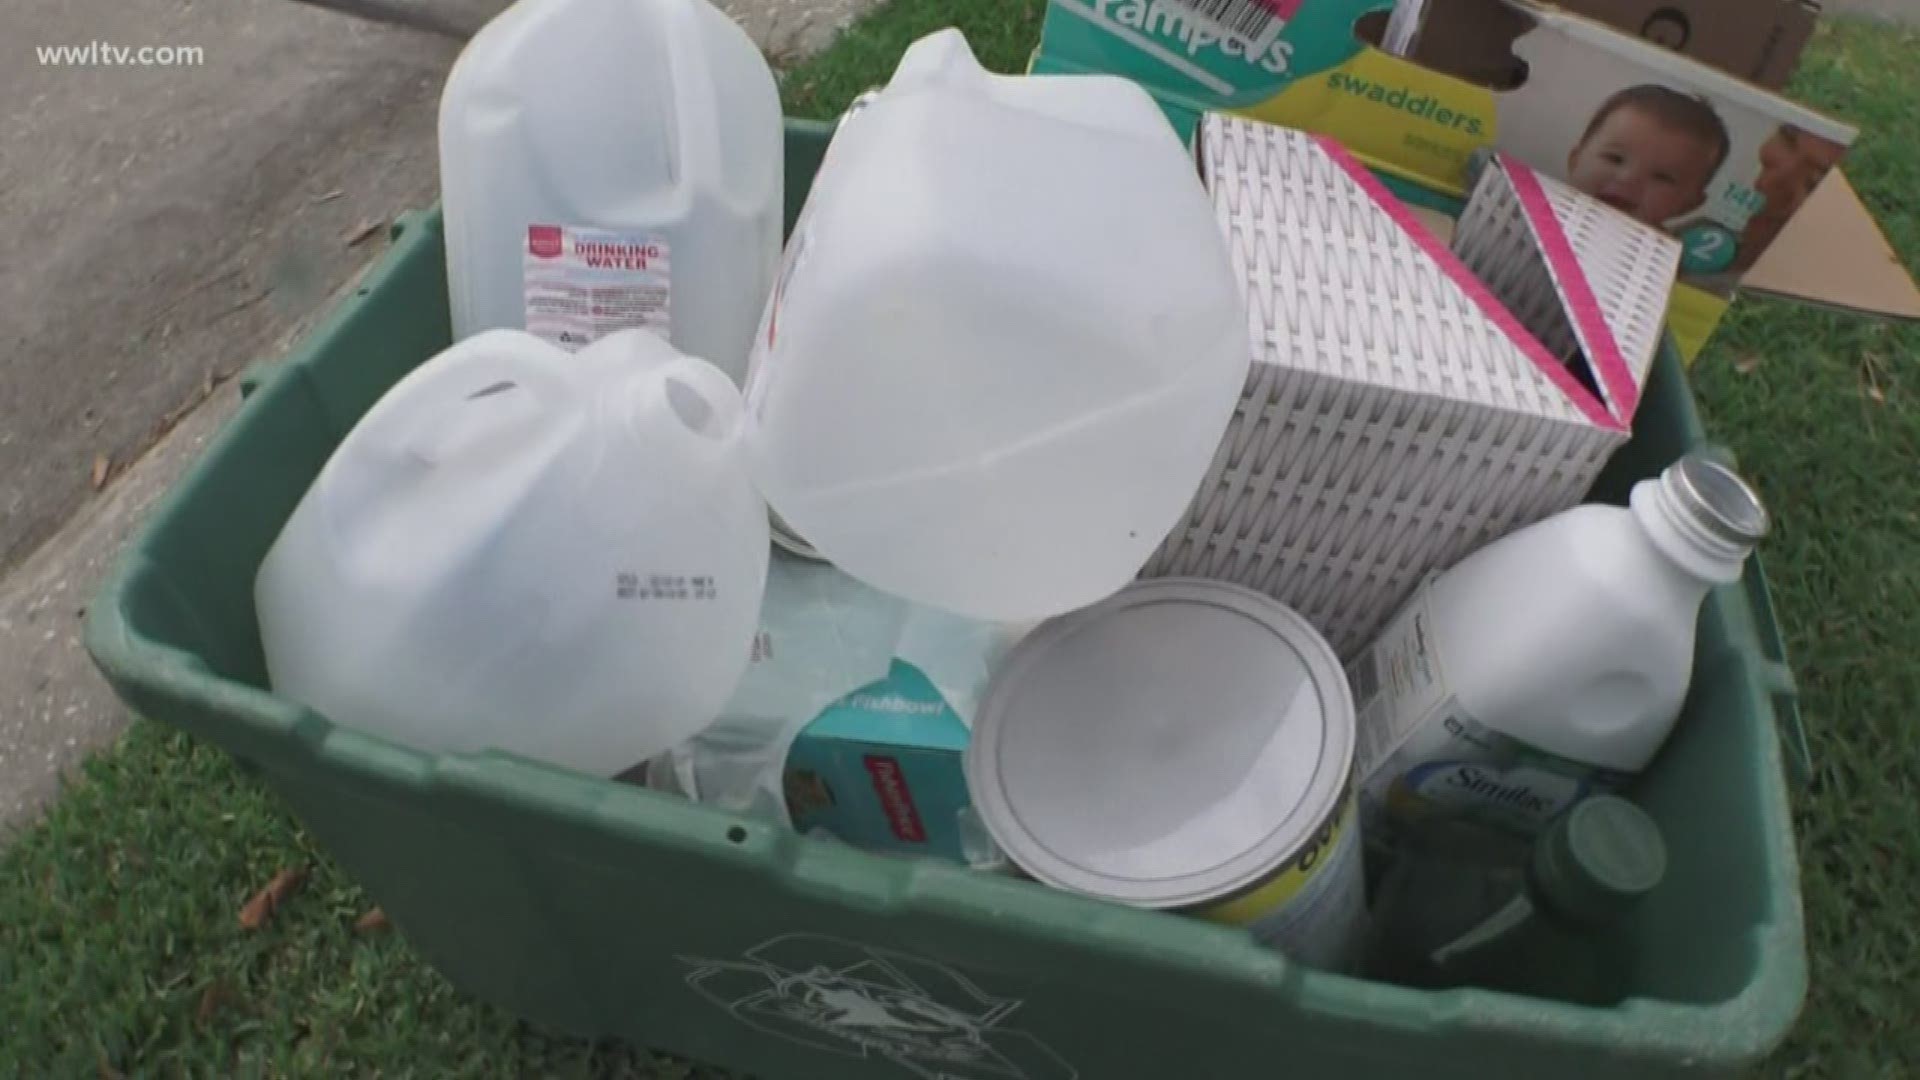 Orleans and Jefferson Parish officials are scrambling to find a new recycler after Republic Services announce they will no longer take household recycling at their facility in Metairie.